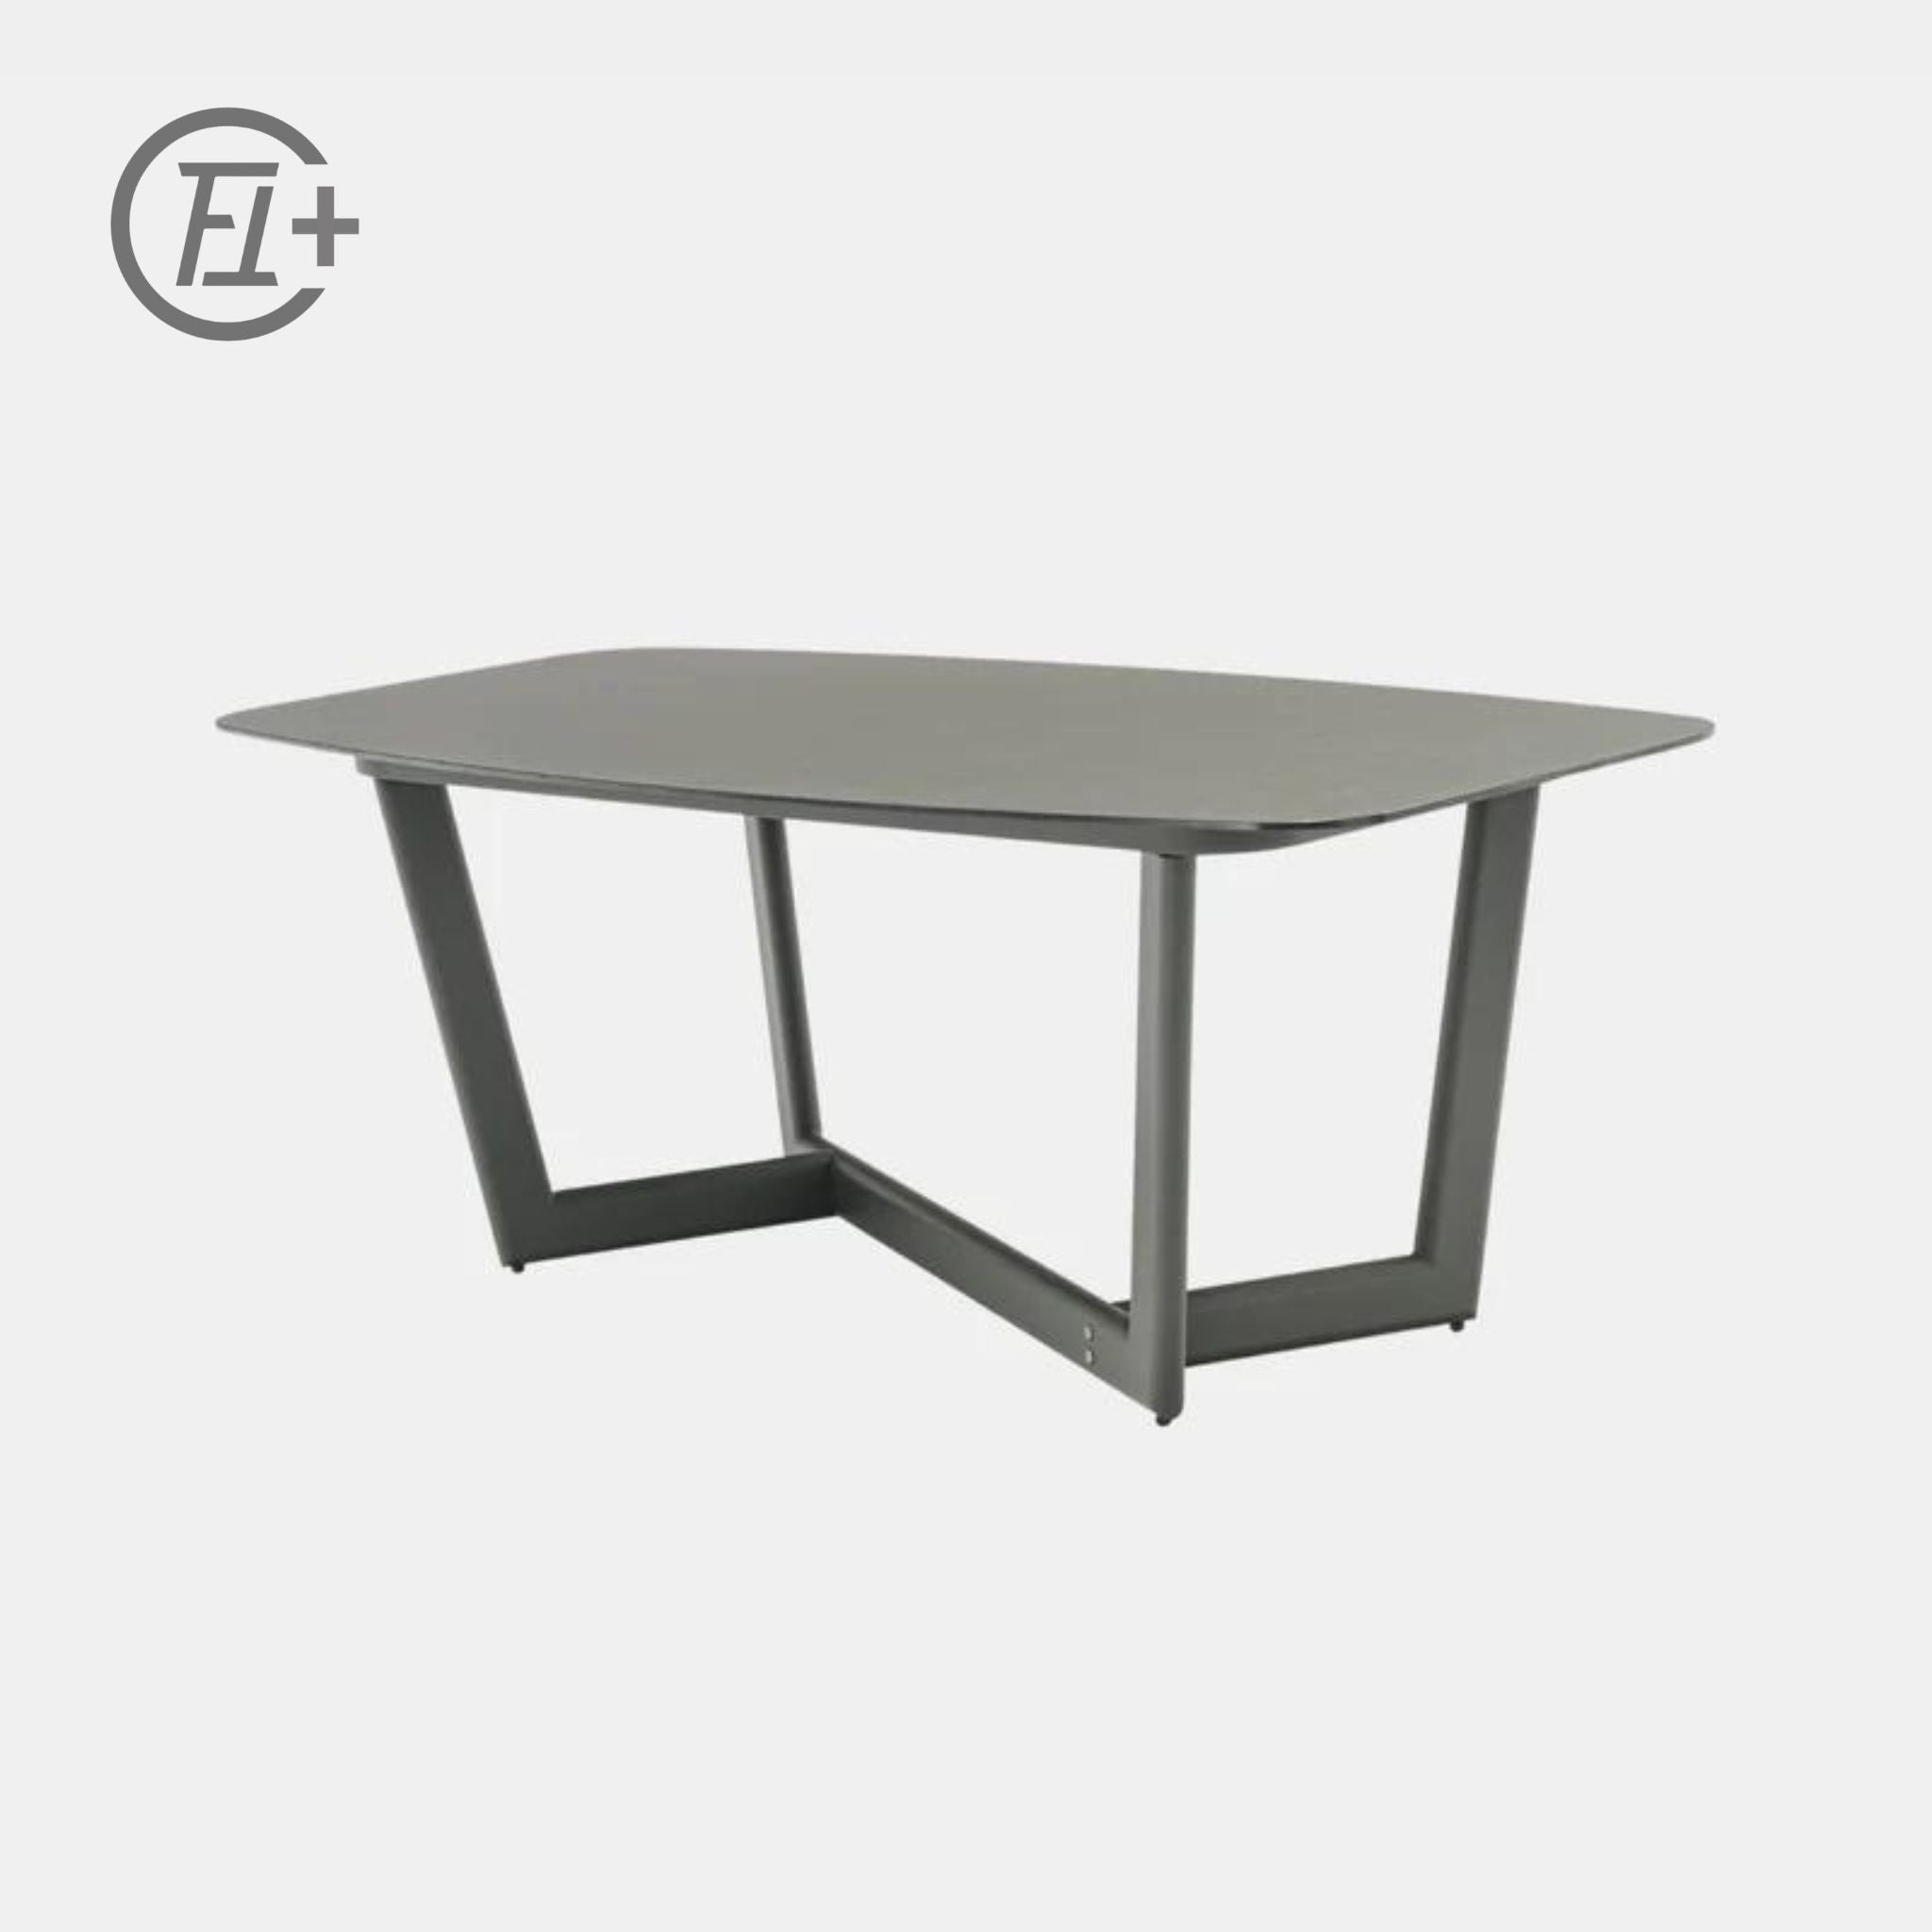 Hug Series | Outdoor Rectangular Dining Table - The Feelter